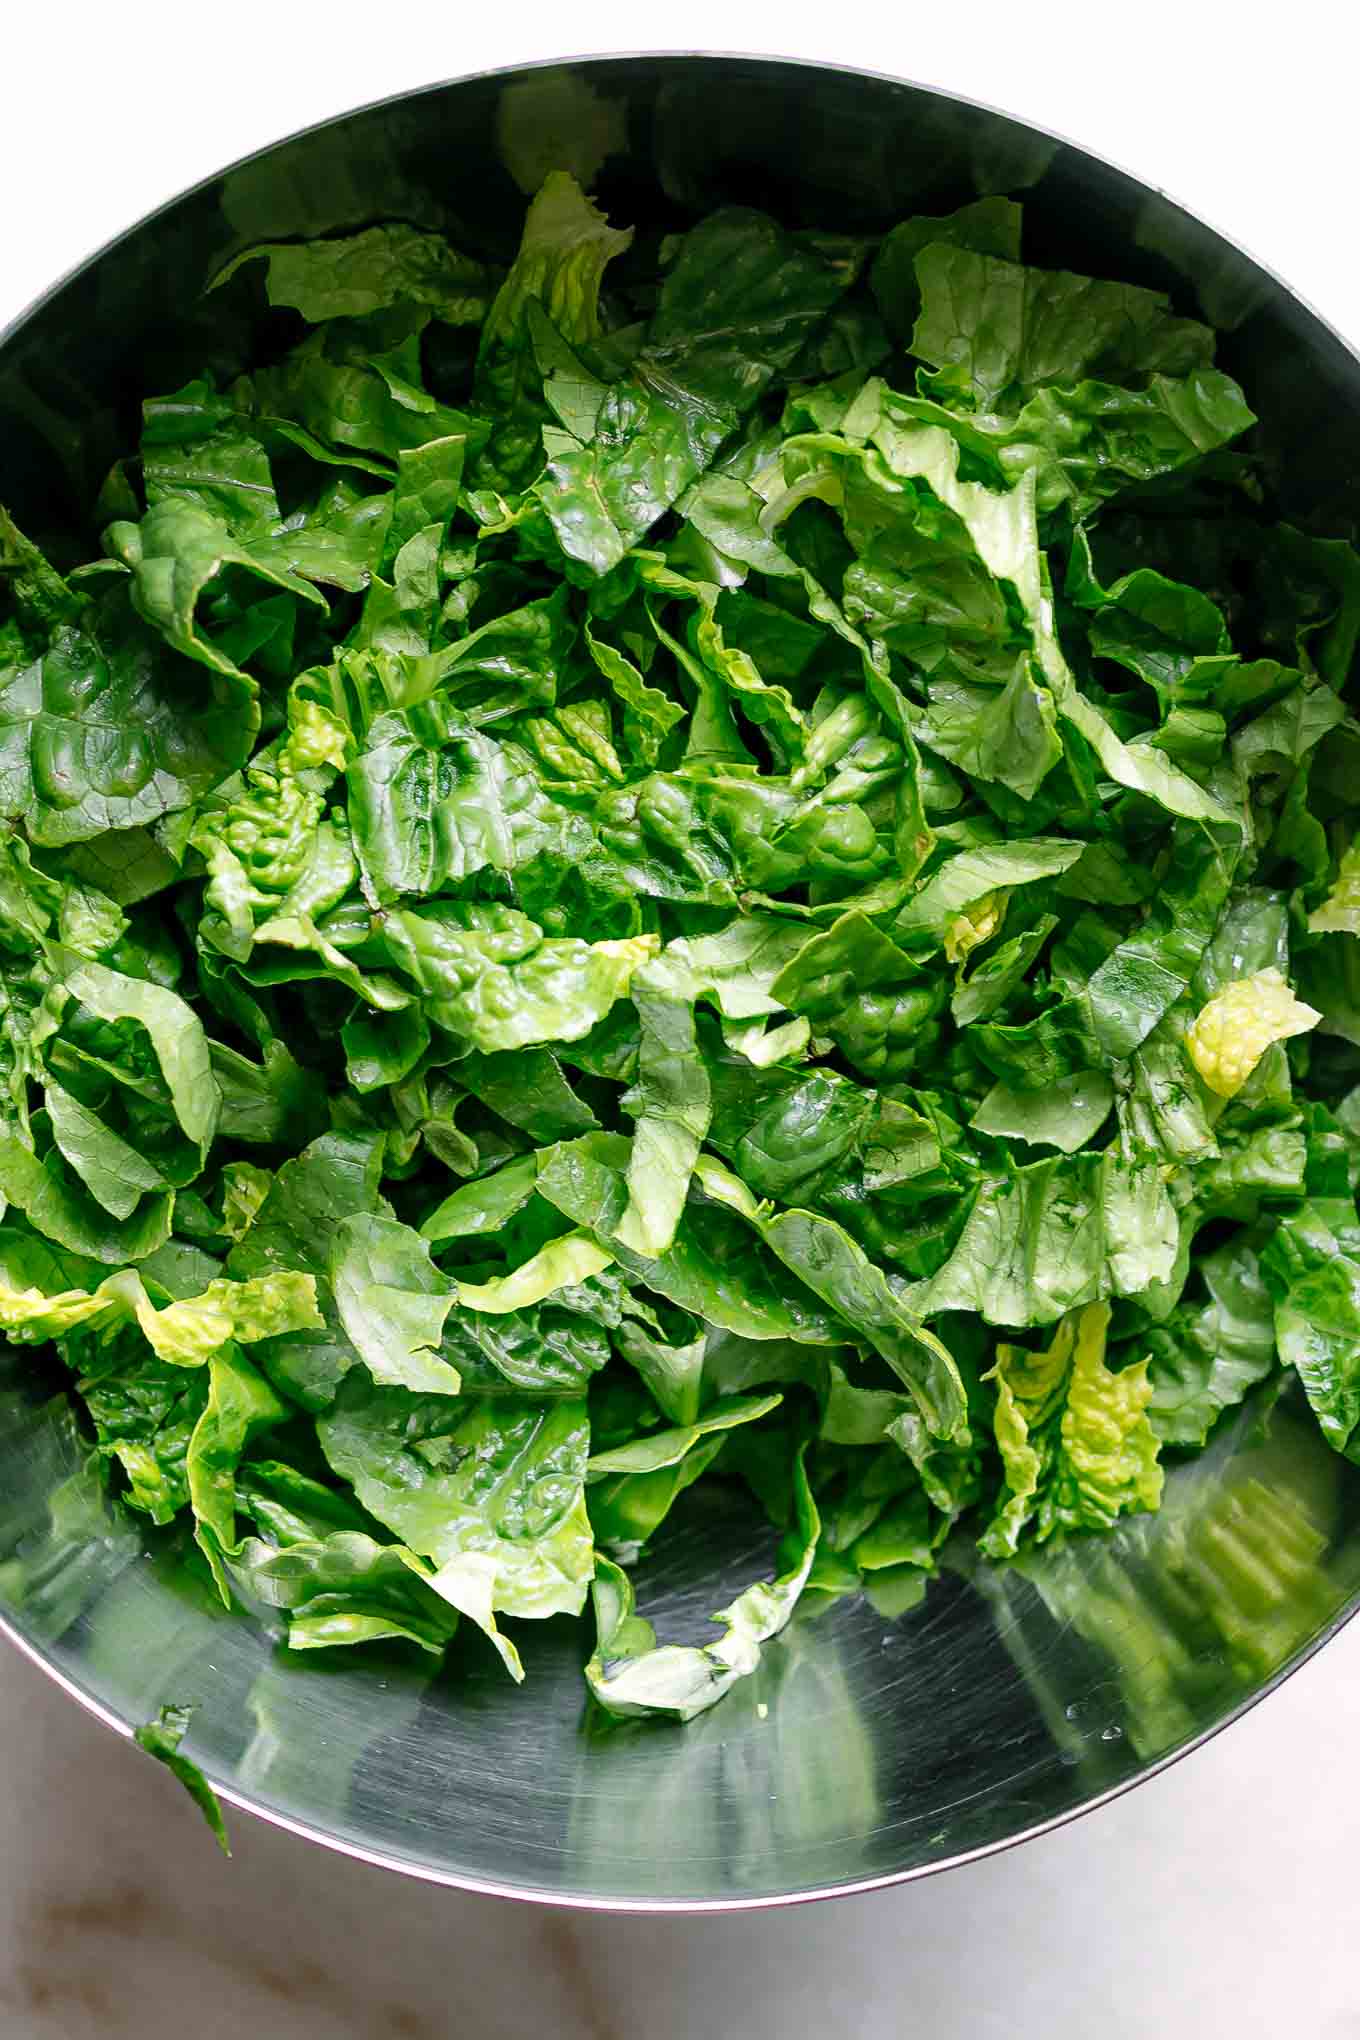 washed and cut romaine lettuce in a metal mixing bowl on a white table